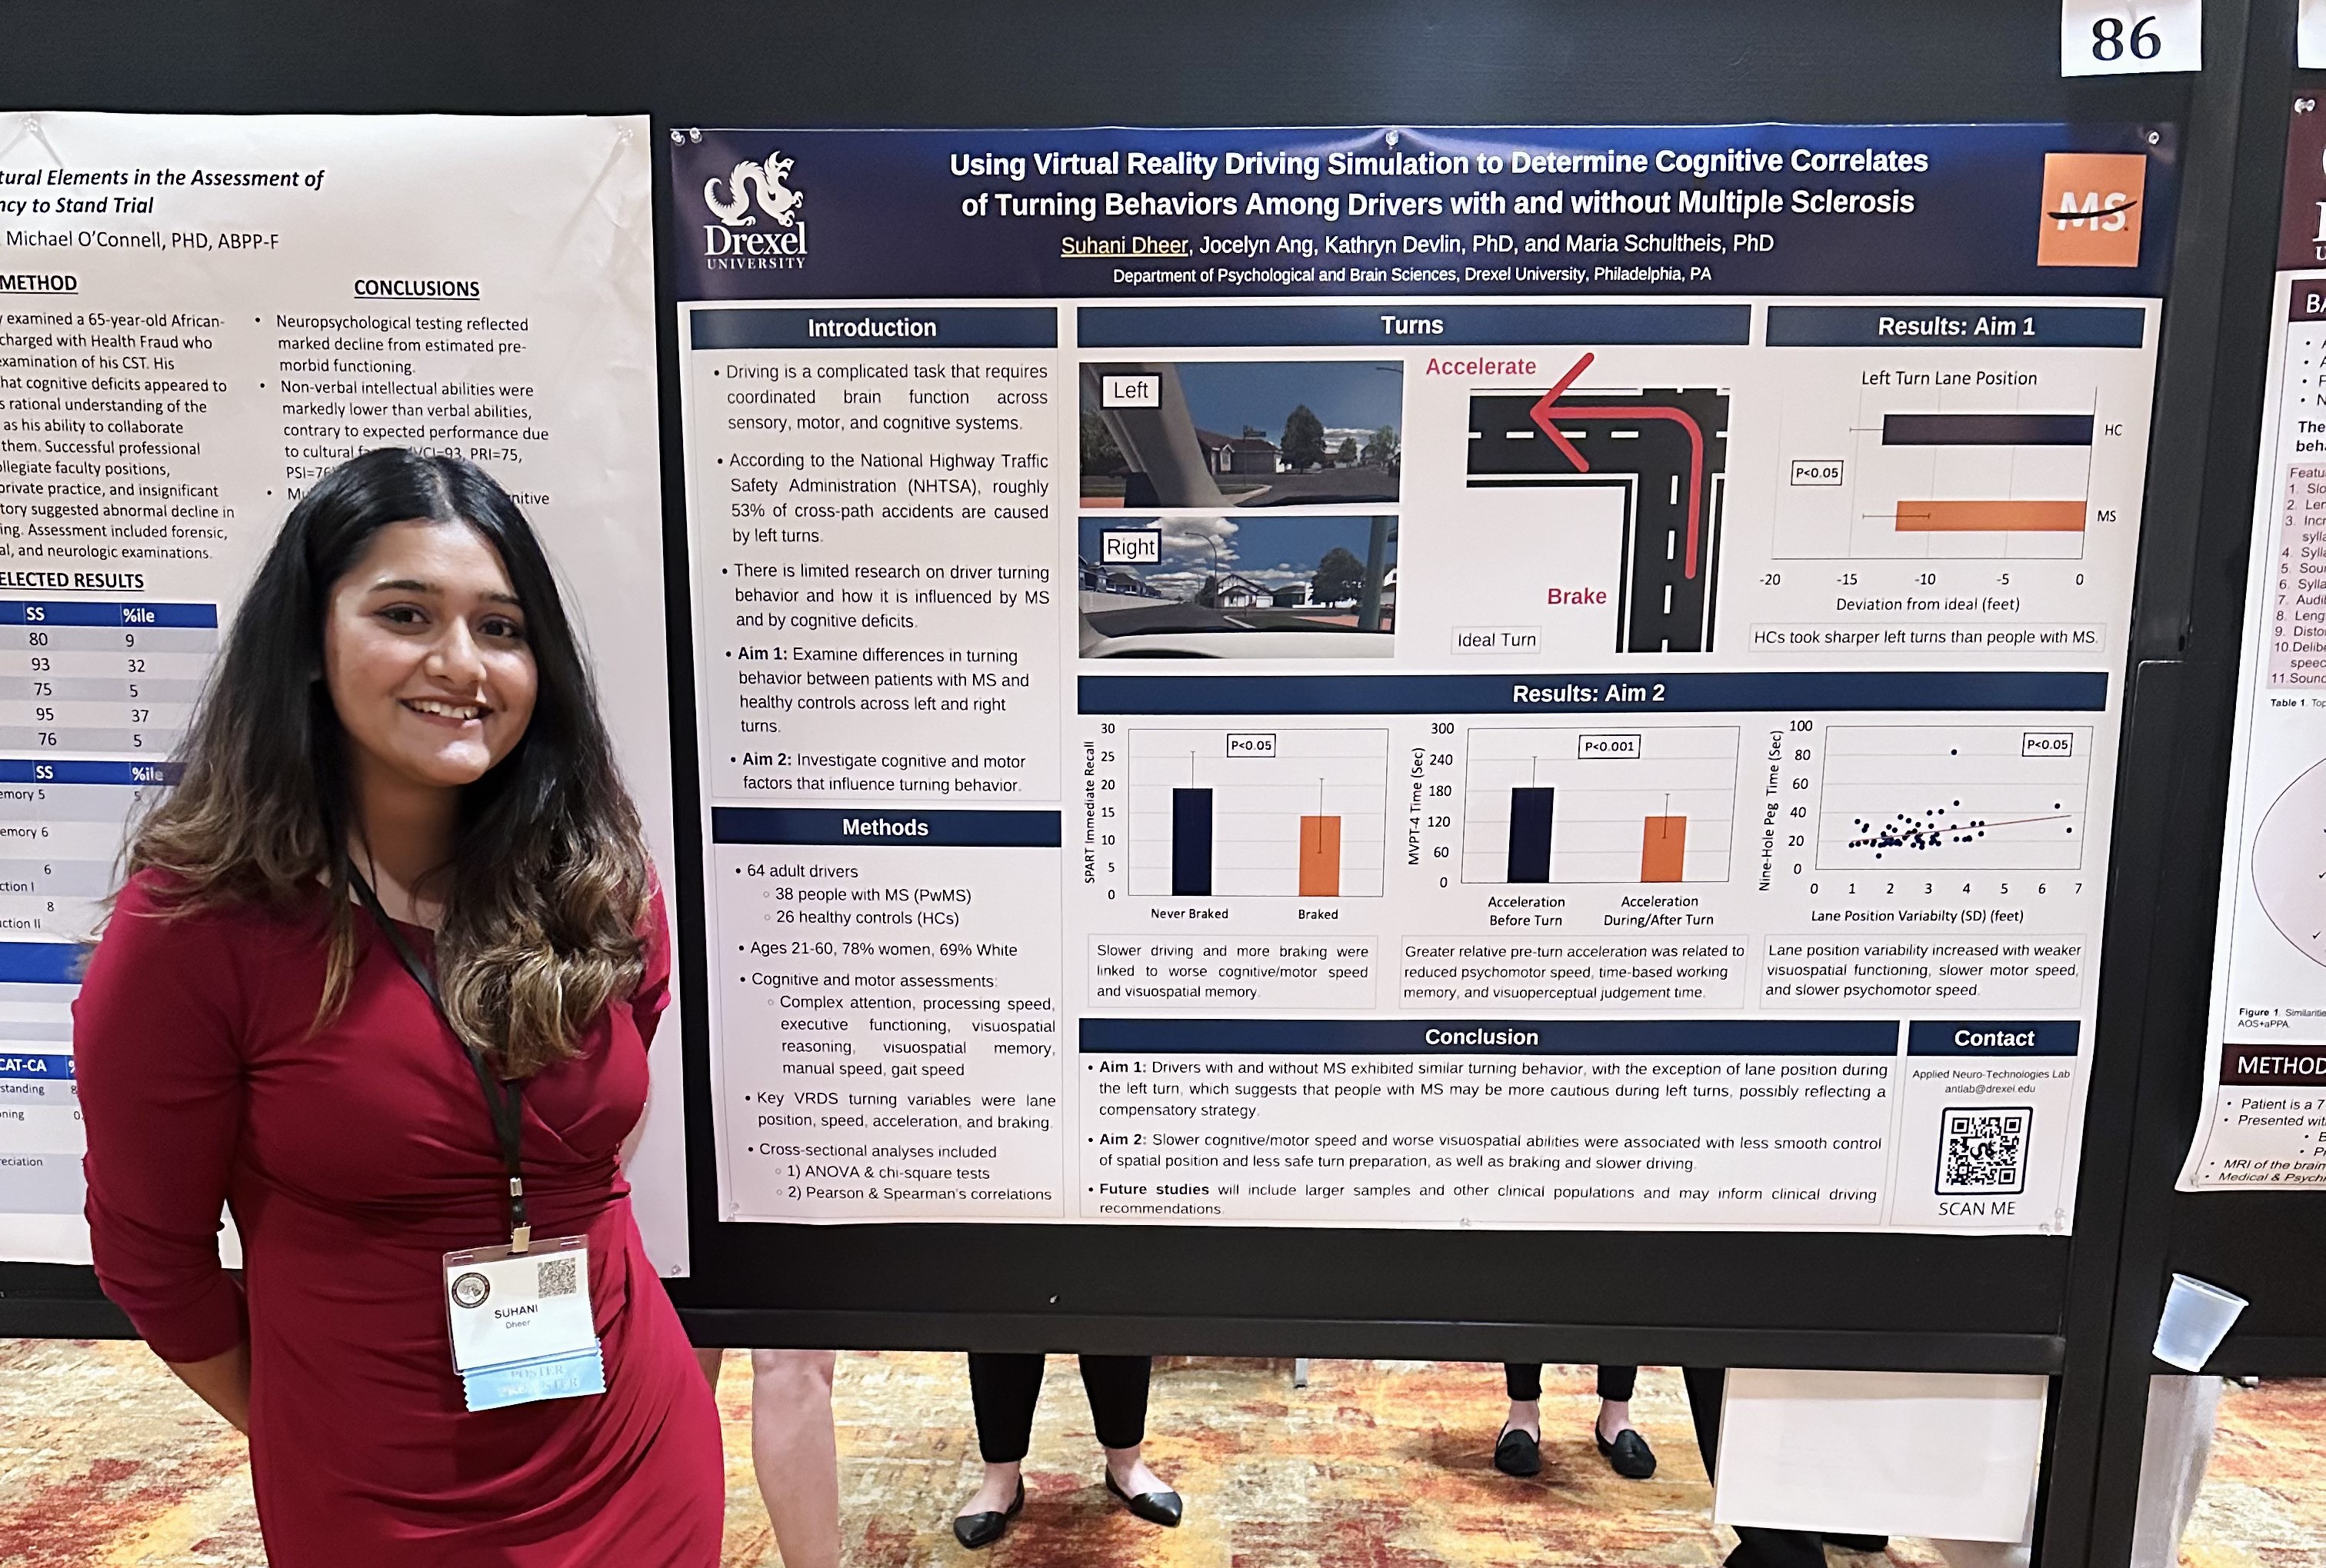 Suhani Dheer with her research poster